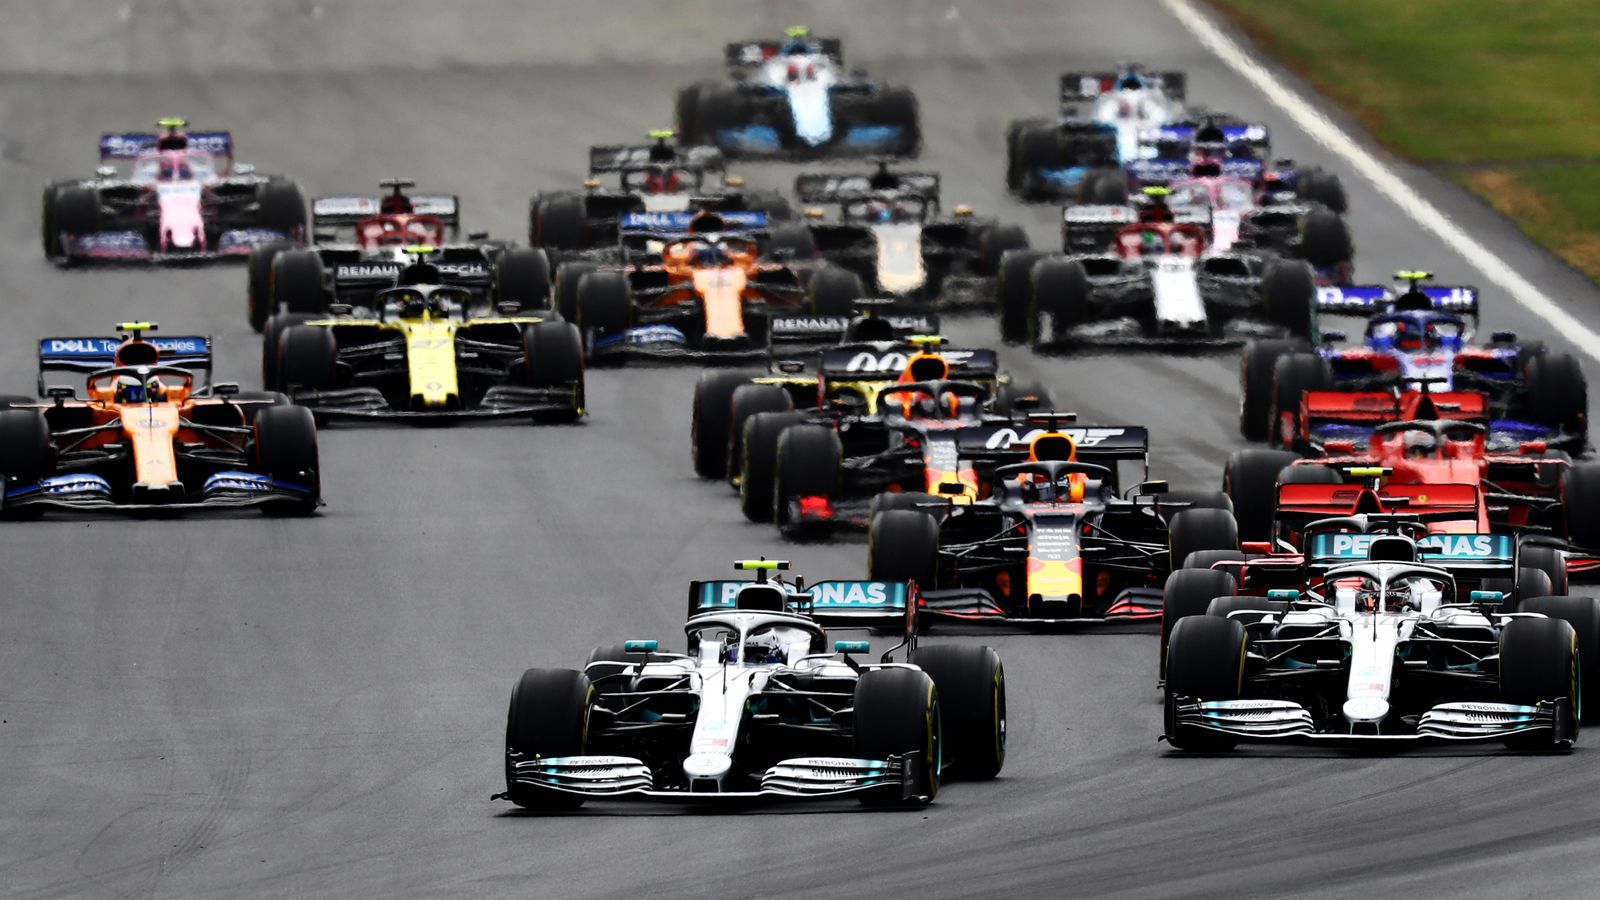 F1 2020 start times revealed, British GP moved back an